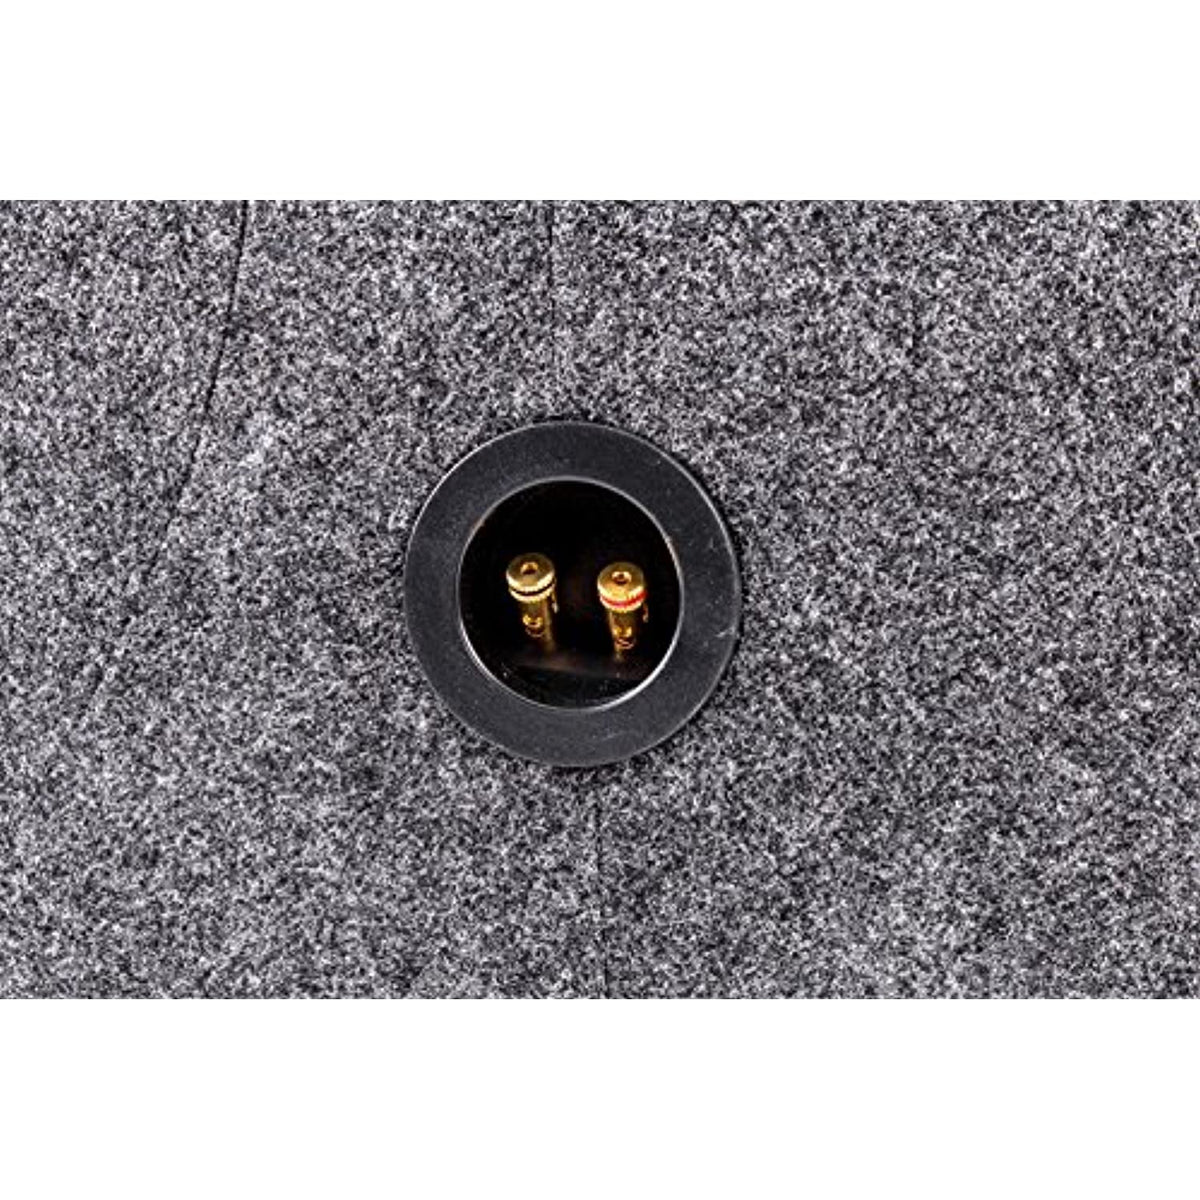 QPower 12 Inch Heavy-Duty Dual Sealed Carpet Covered Durable Car Audio Vehicle Subwoofer Enclosure Woofer Box, Charcoal Gray